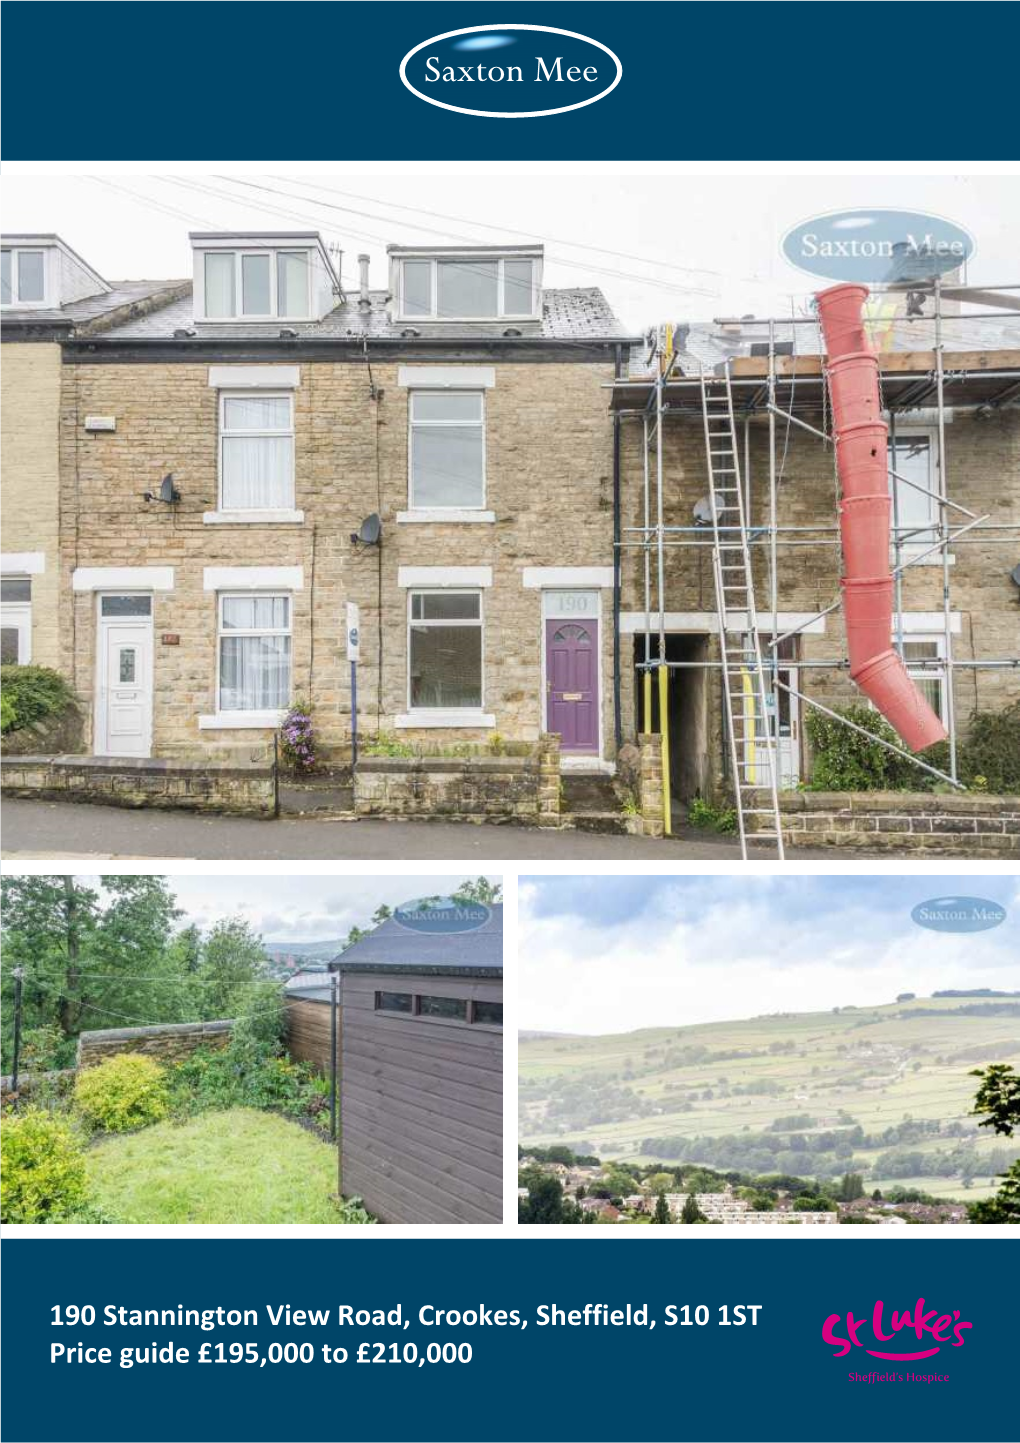 190 Stannington View Road, Crookes, Sheffield, S10 1ST Price